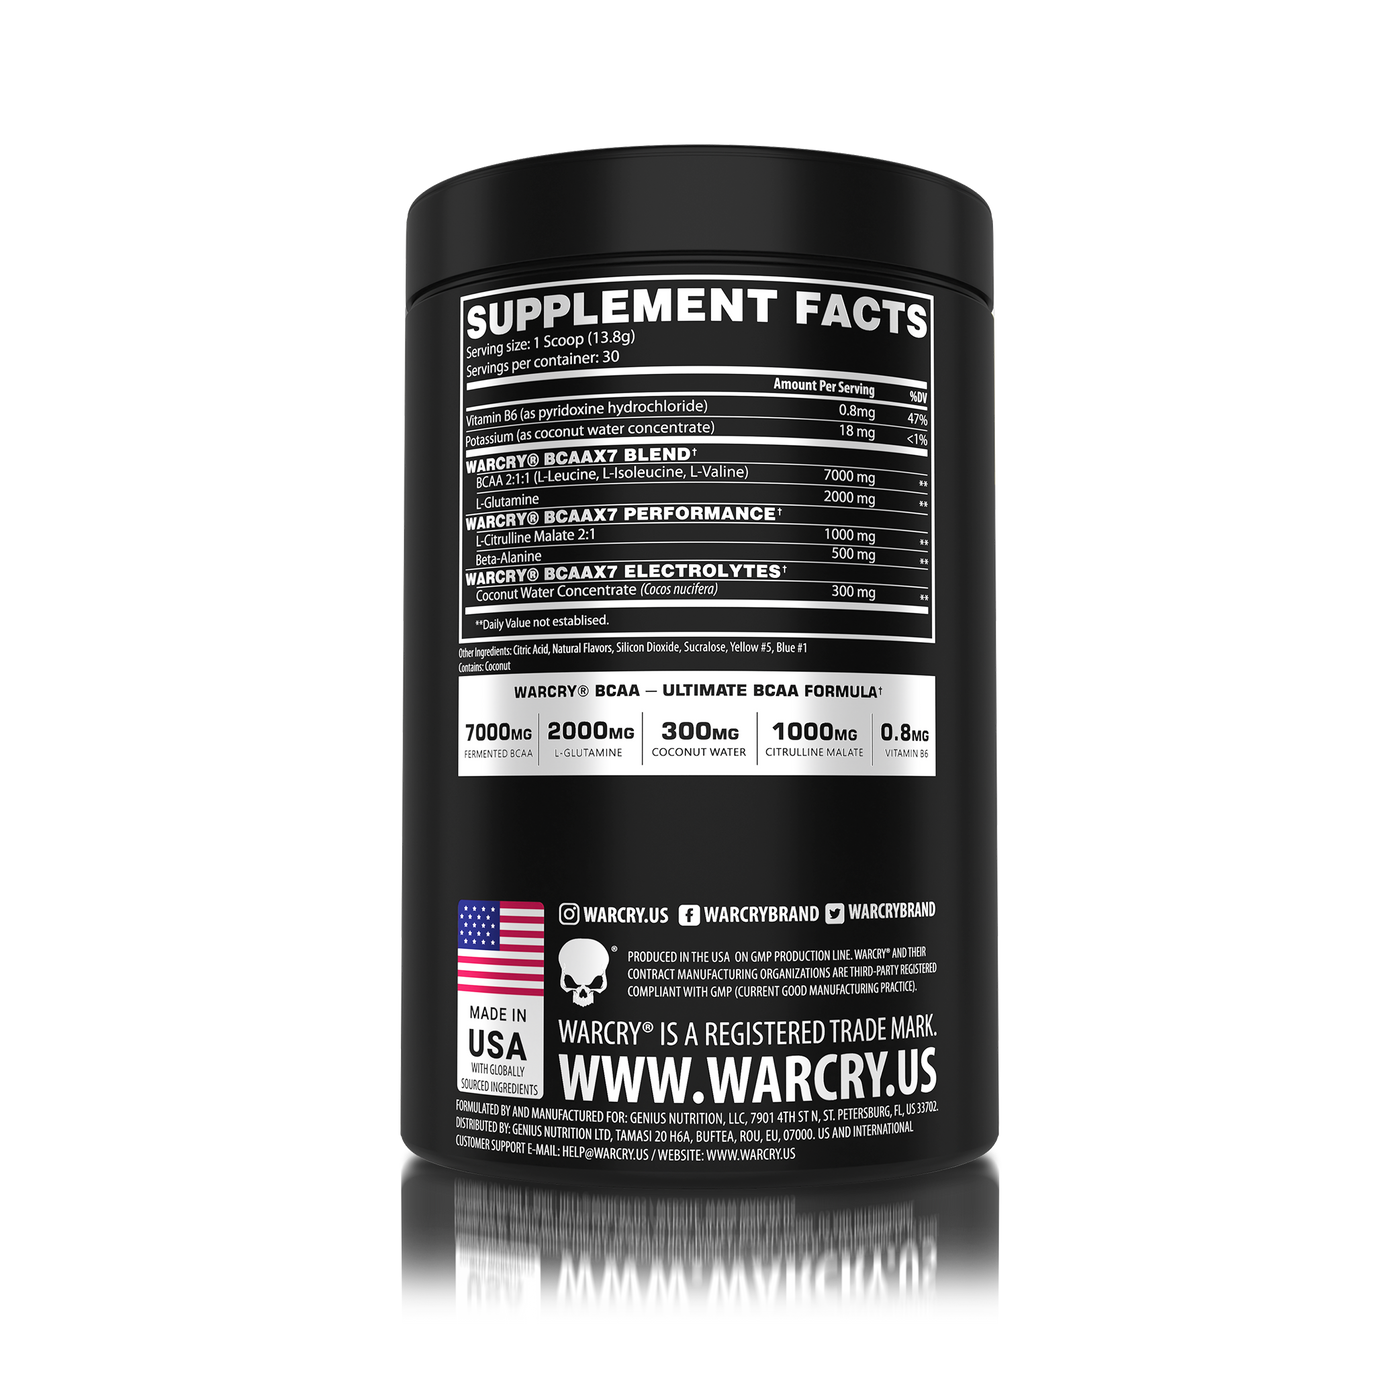 WARCRY BCAA, Branched-Chain Amino Acids, 414g, 14.60oz, 30 Servings, Green Apple Flavor, Naturally Flavored, Dietary Supplement, Shop now in US, Free Shipping in US